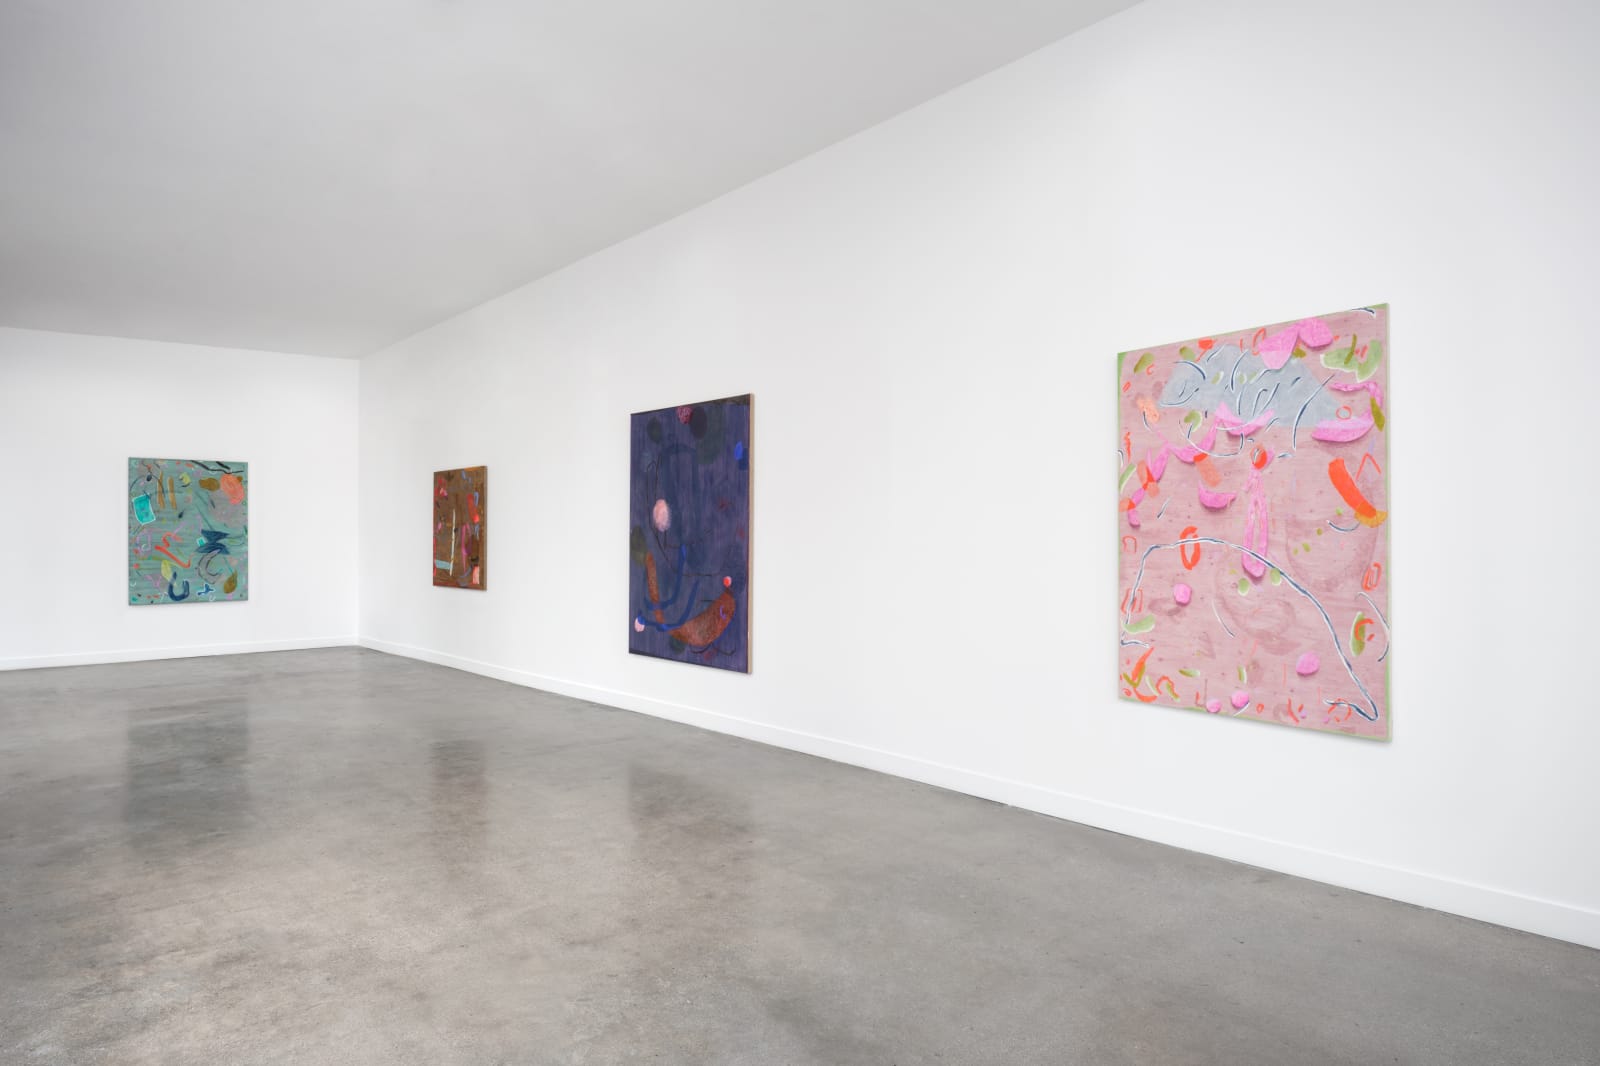 Installation view of Clare Grill: Oyster, May 21 - June 30, 2022